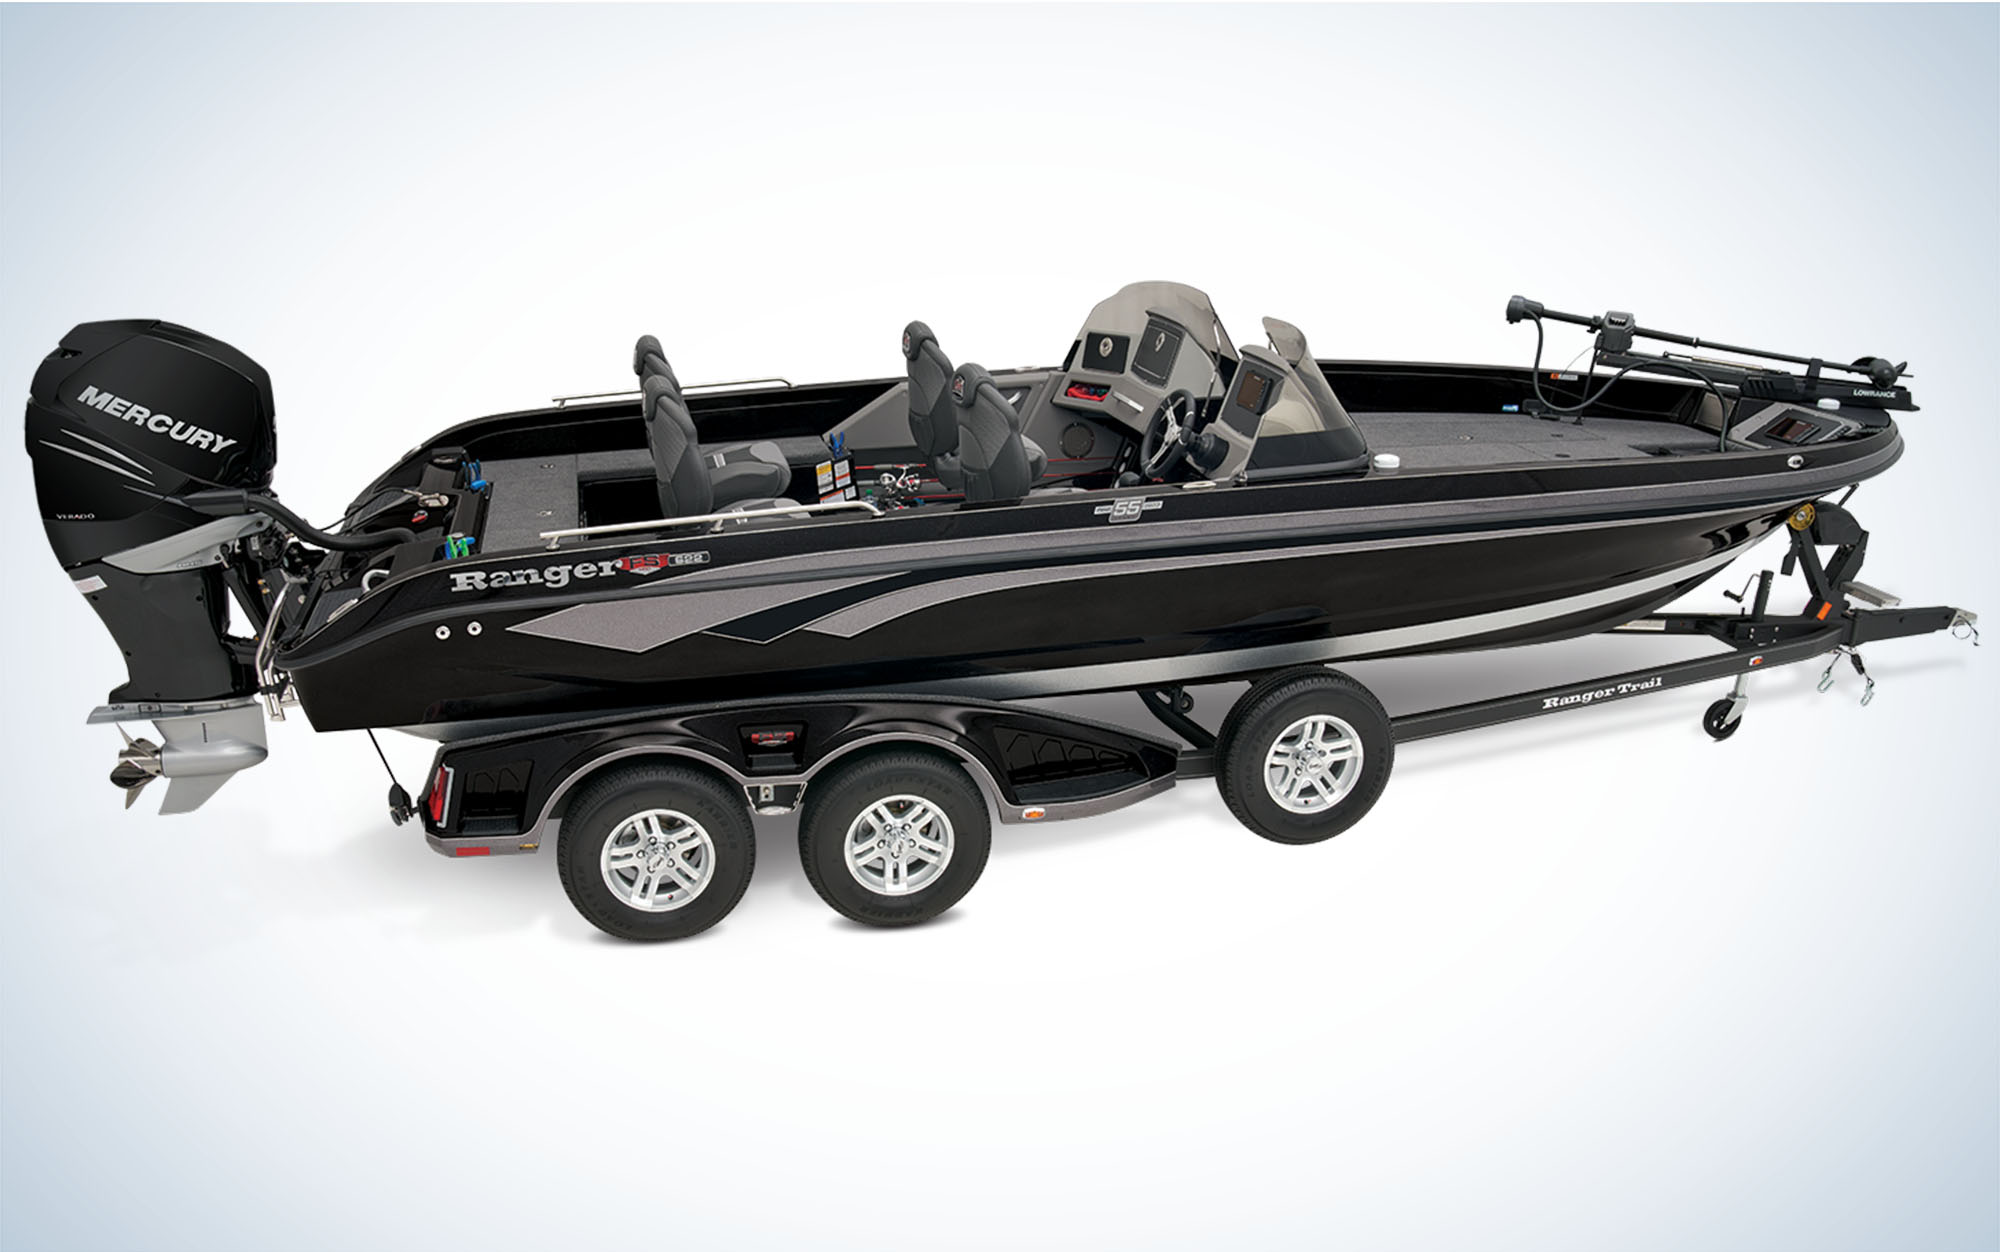 The Ranger 622FS PRO is one of the best bass boats.